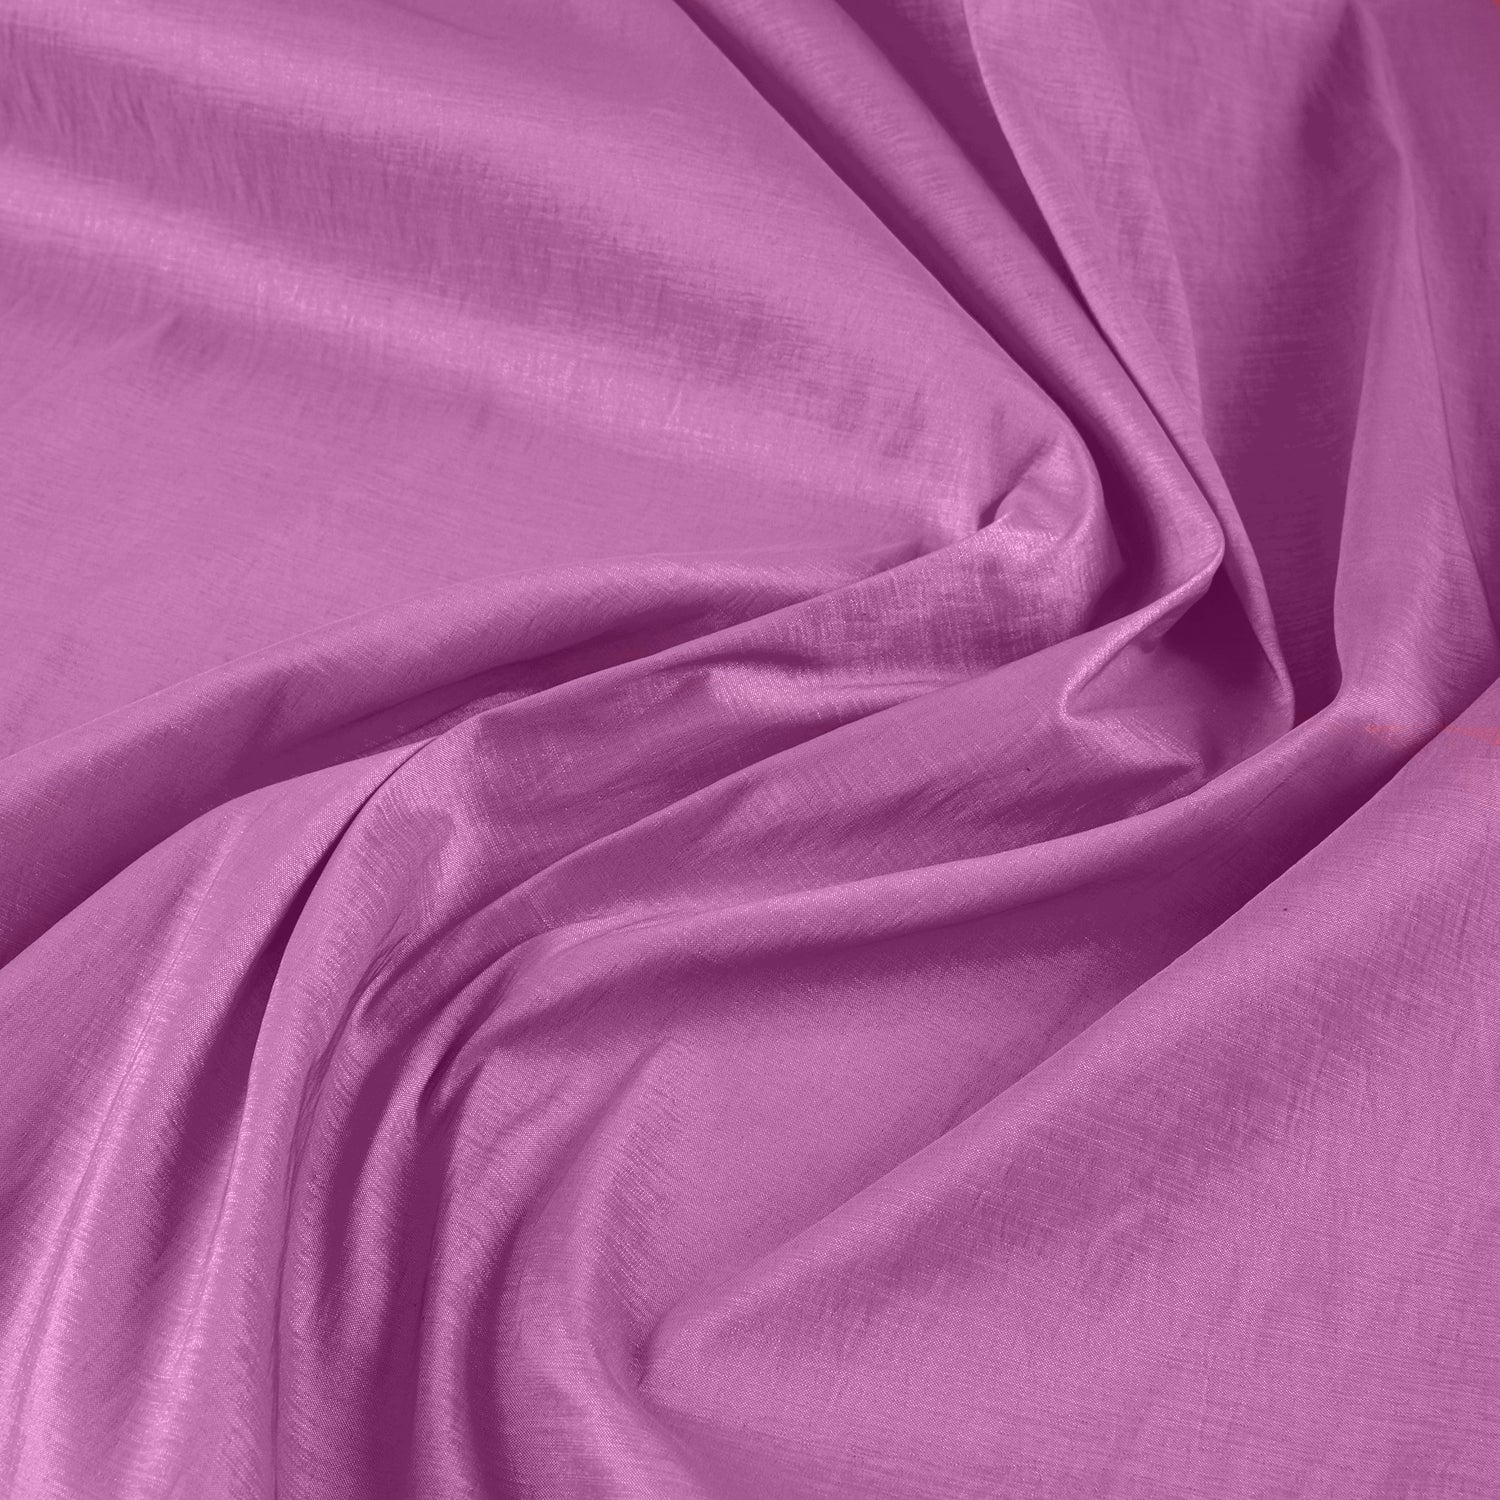  Stretch L'Amour Satin Blush Pink, Fabric by the Yard : Arts,  Crafts & Sewing